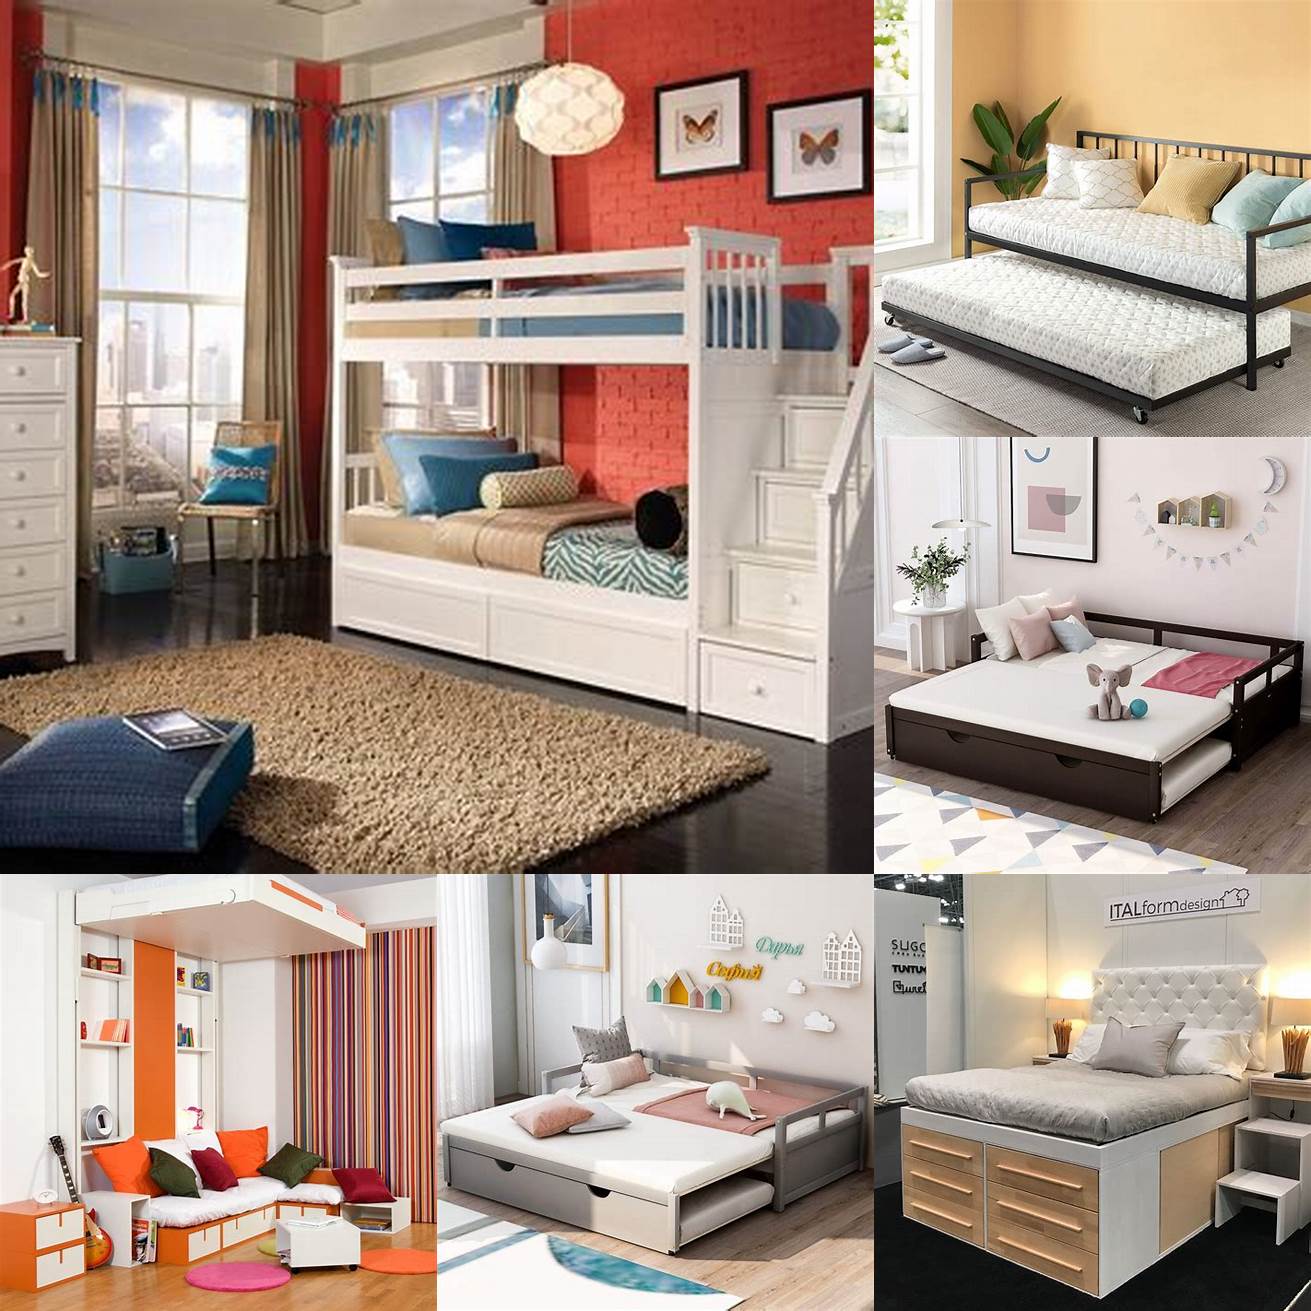 Space-saving As mentioned earlier twin beds with trundle can save space in your bedroom or guest room When not in use the trundle bed can be hidden under the frame leaving more floor space for other furniture or activities